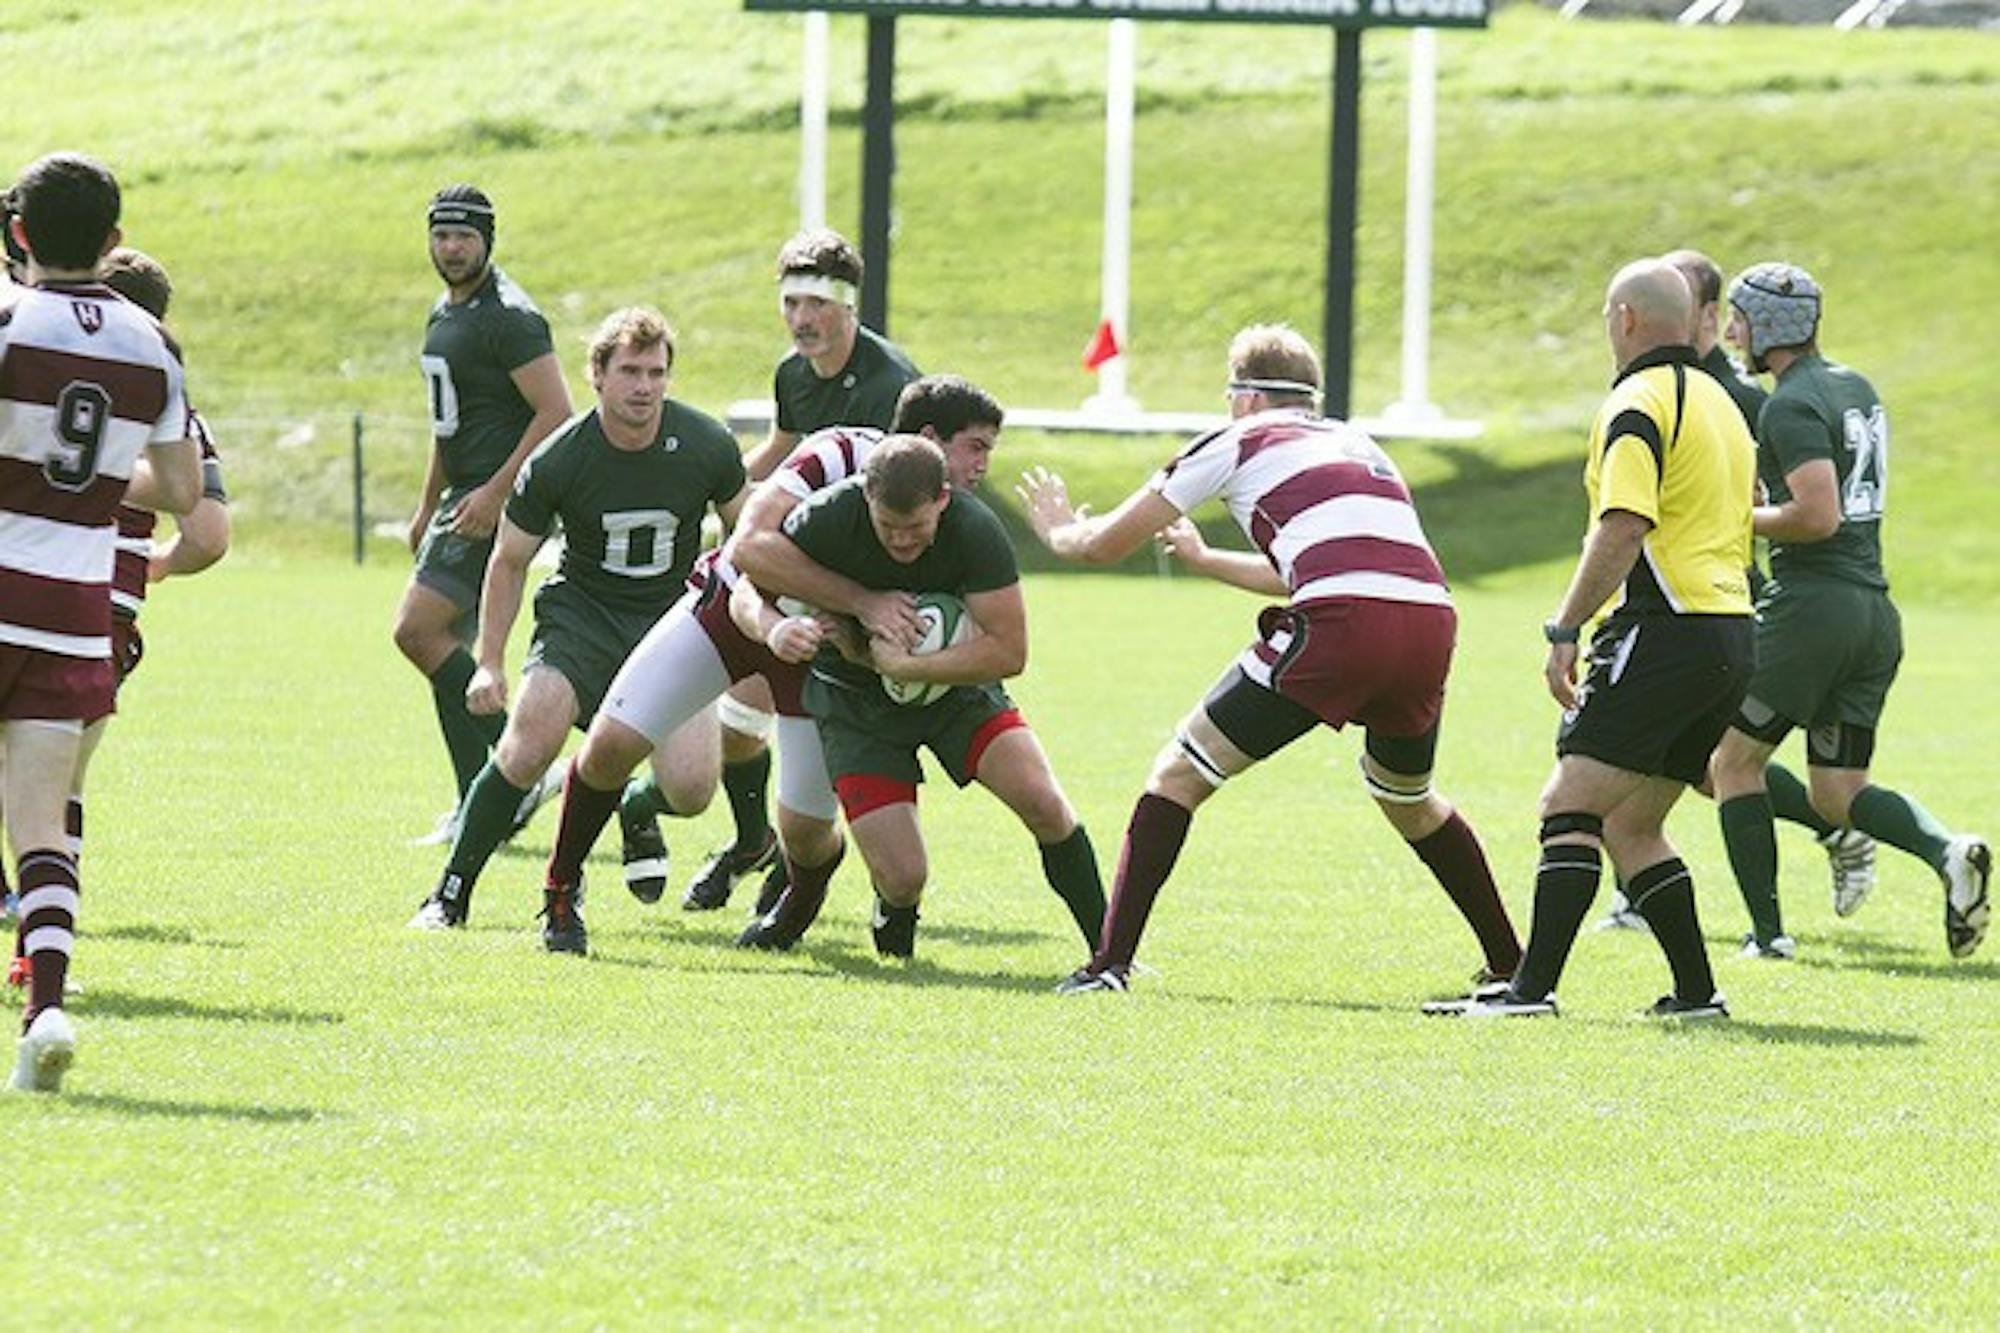 The men's rugby team will face Harvard University in Cambridge, Mass., on Saturday.